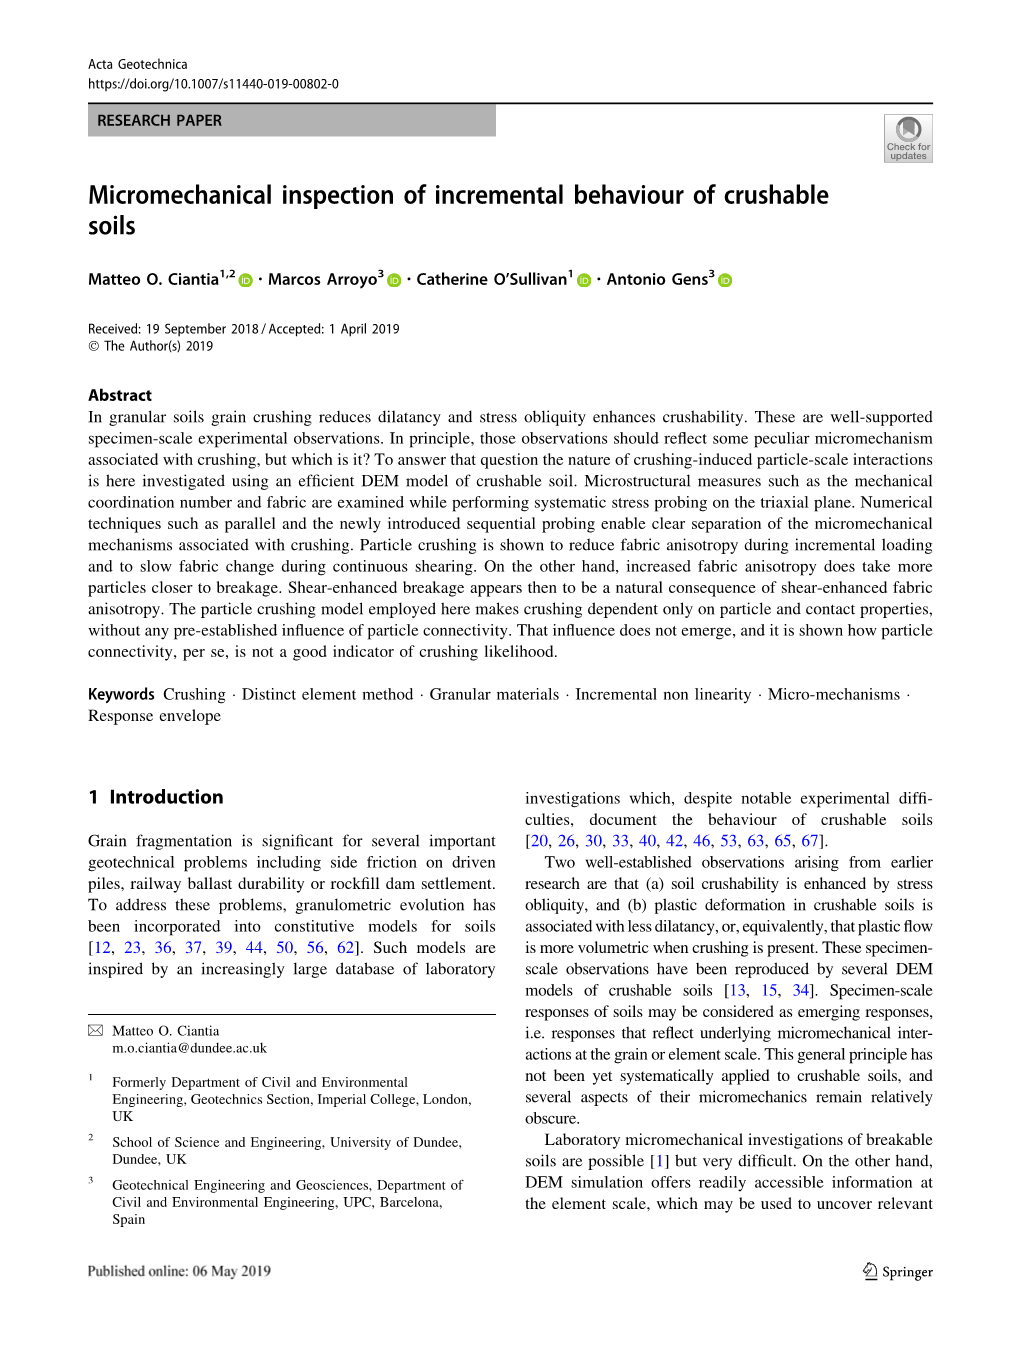 Micromechanical Inspection of Incremental Behaviour of Crushable Soils